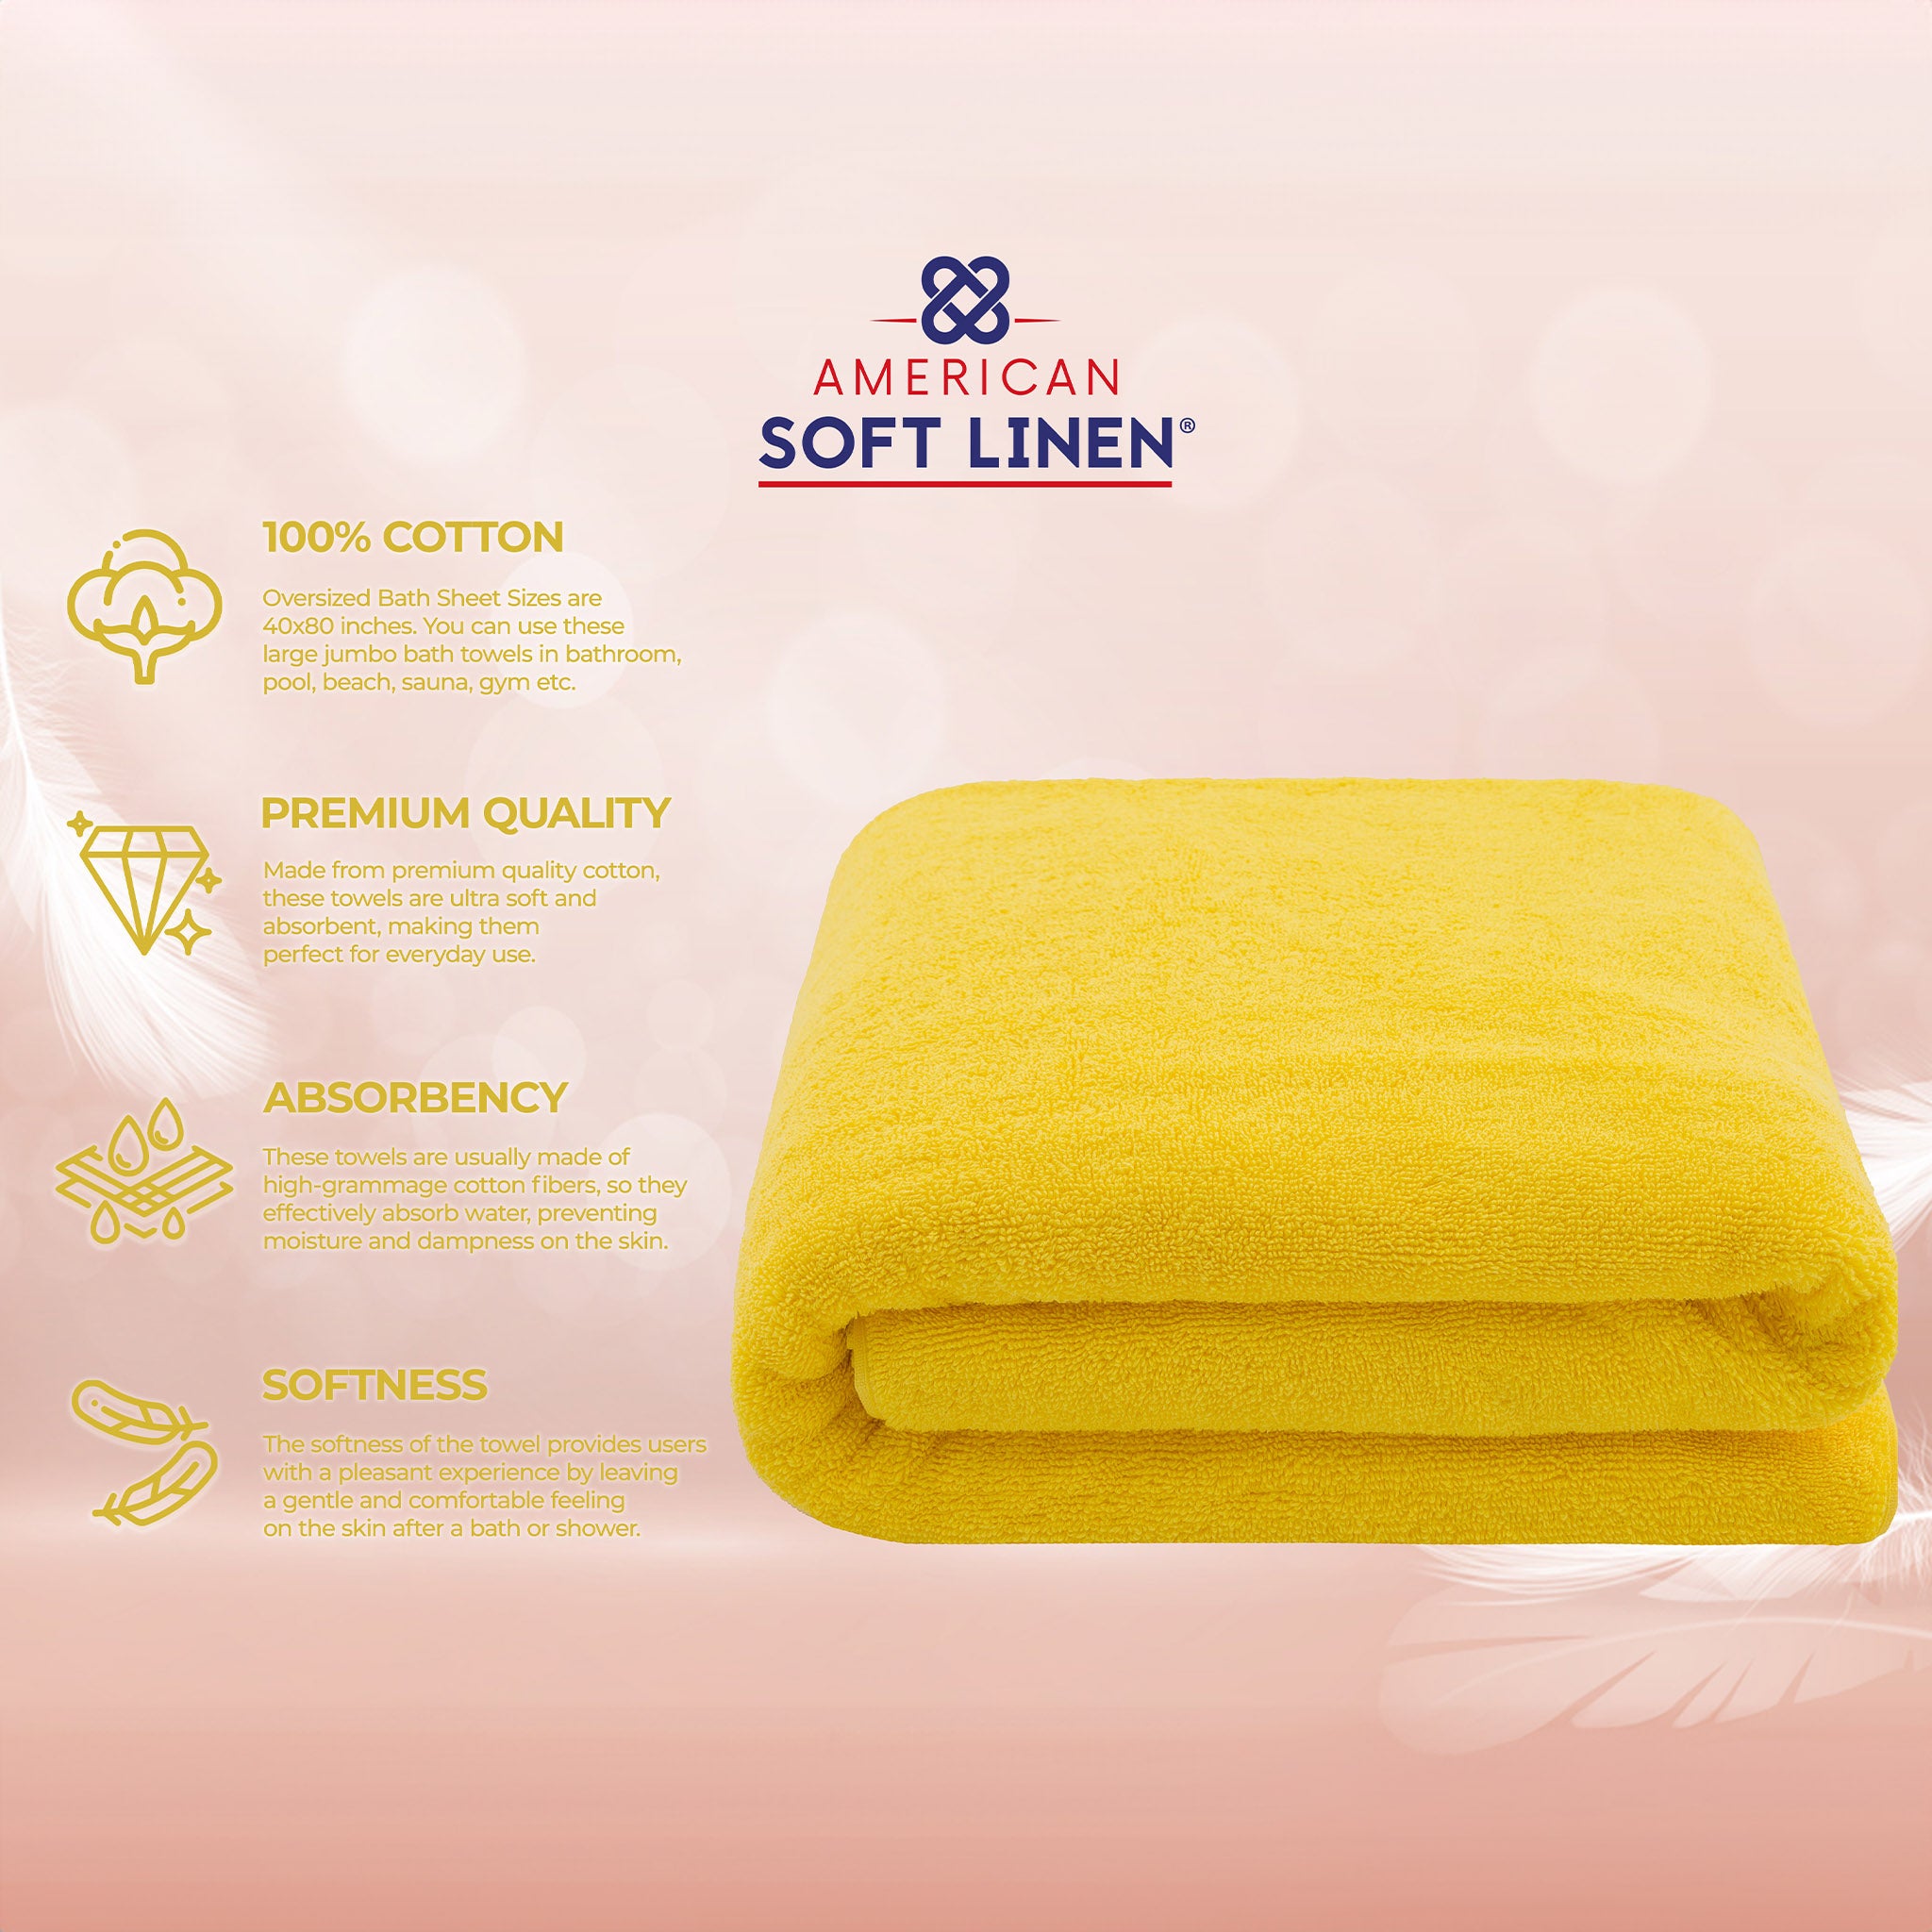 American Soft Linen 100% Ring Spun Cotton 40x80 Inches Oversized Bath Sheets yellow-4